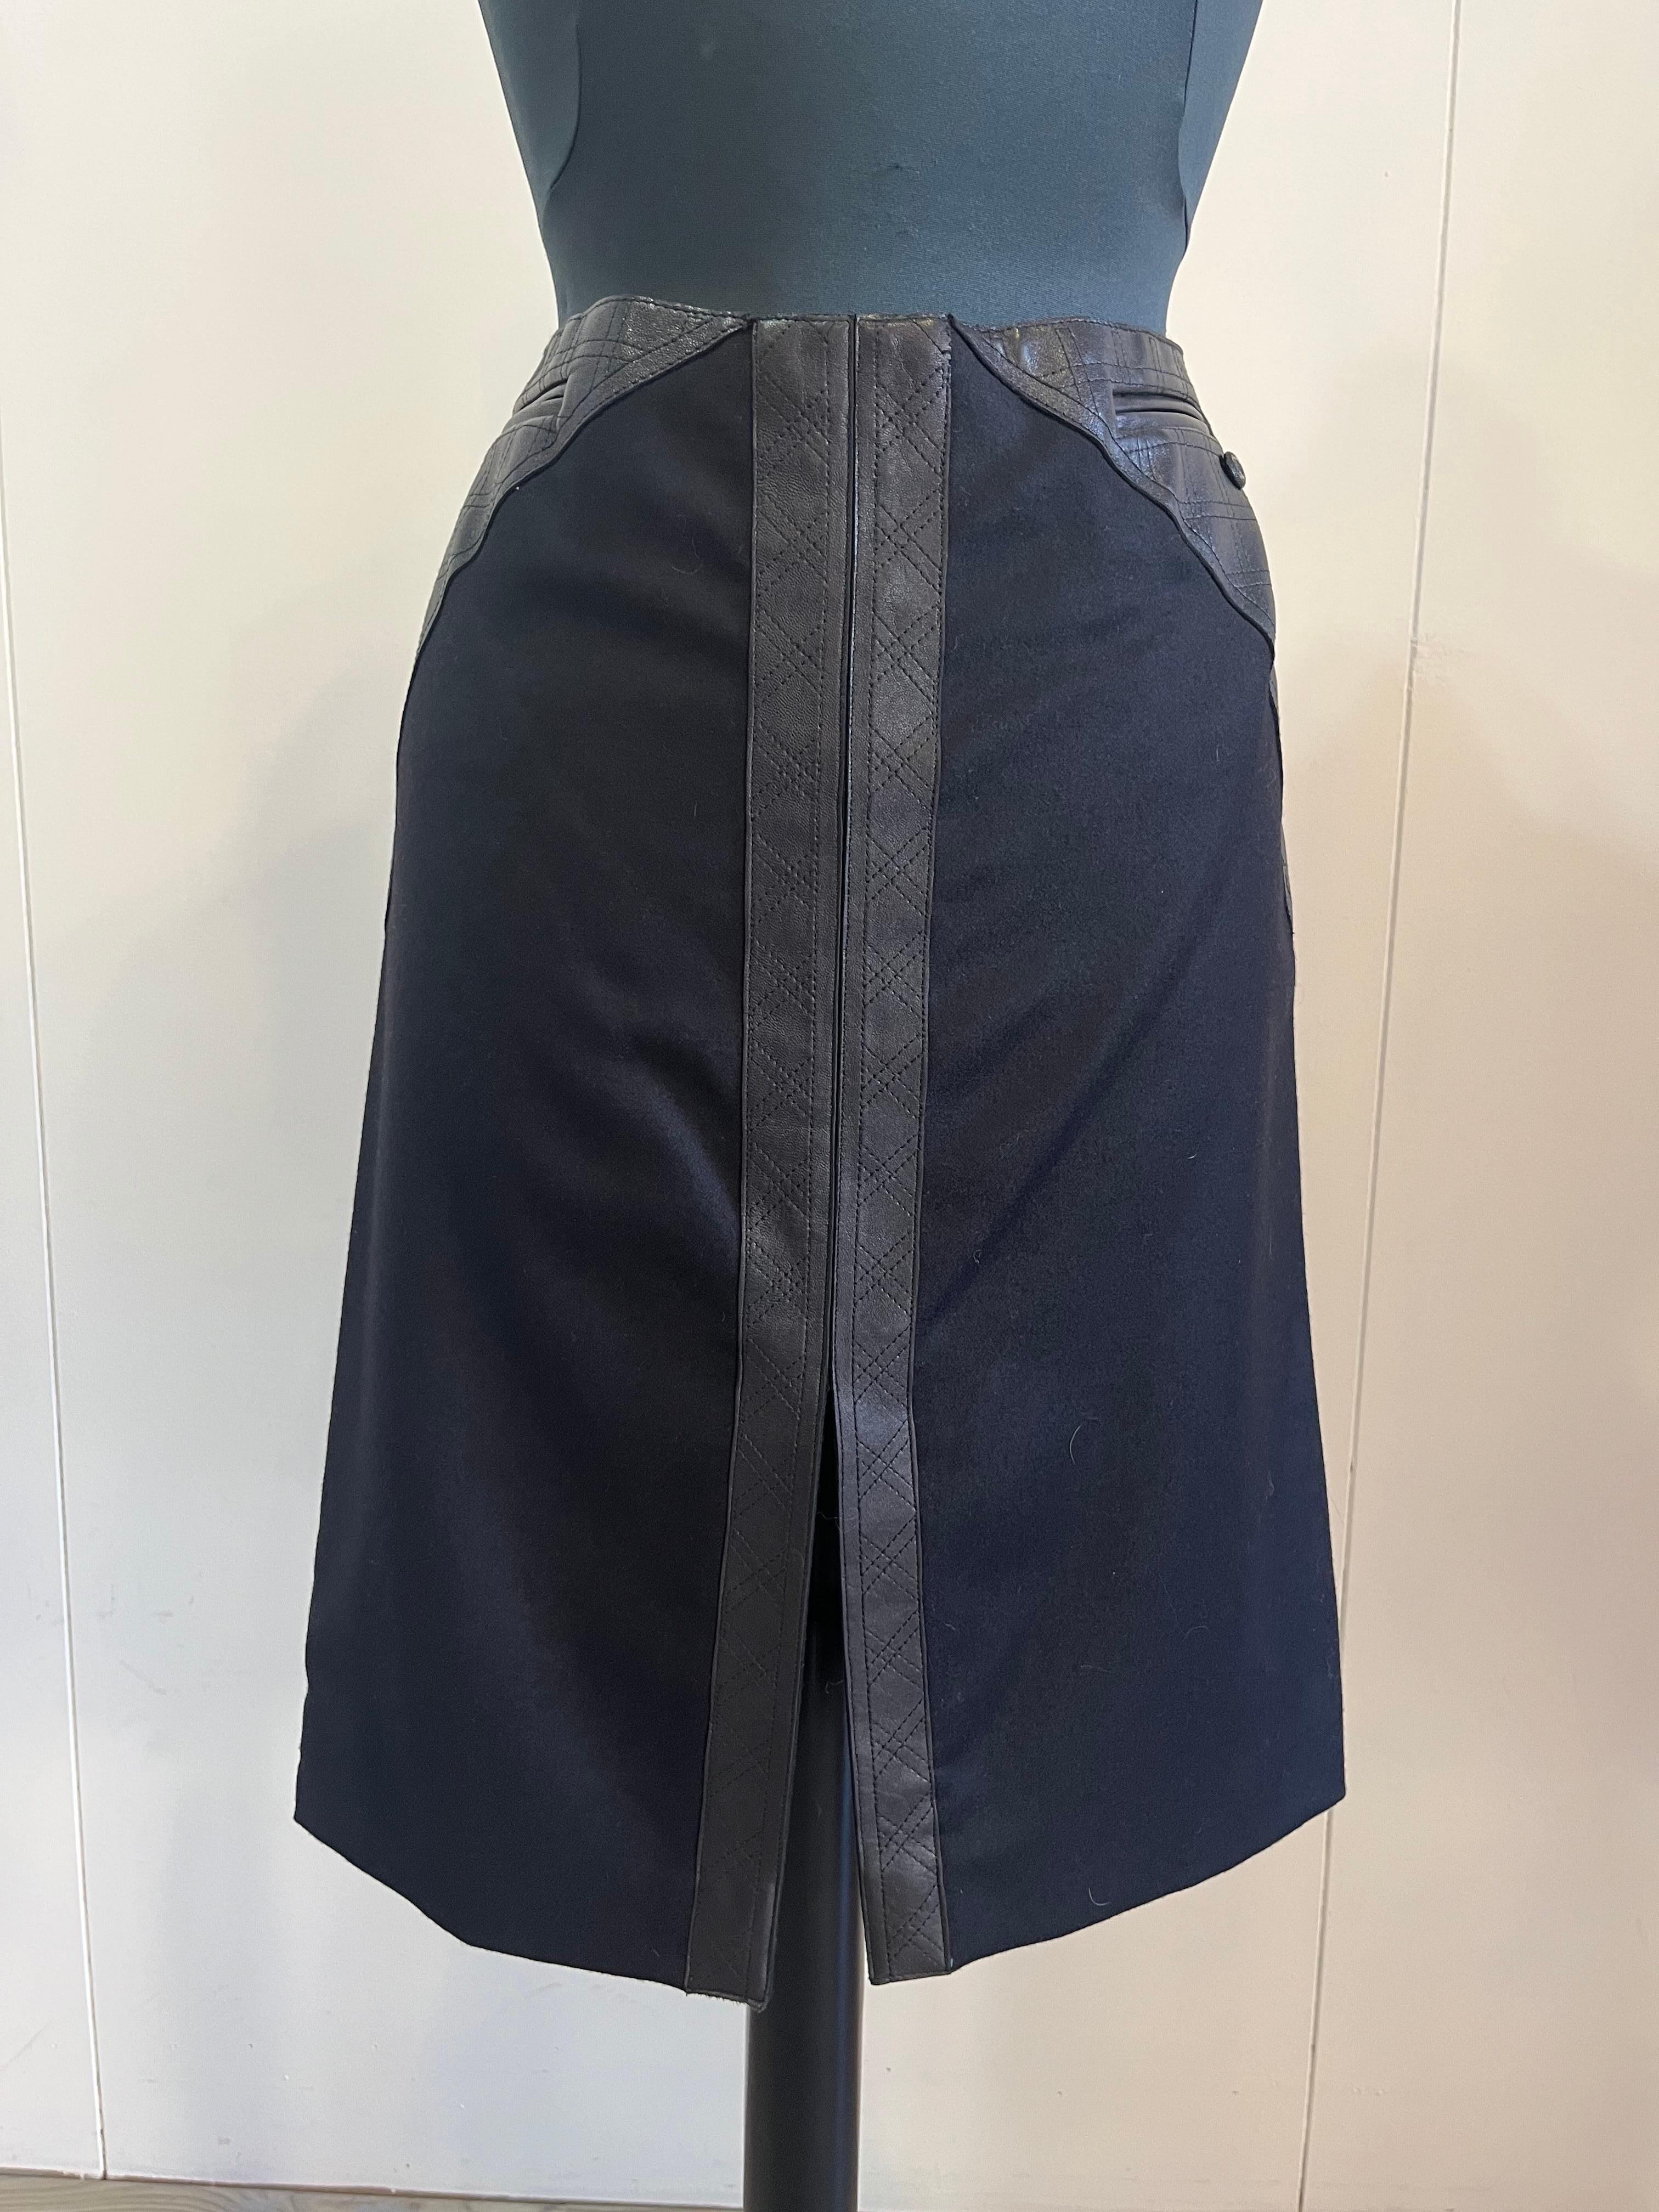 Chanel wool and cashmere skirt with lambskin inserts. Conditions like new. French size 42 which corresponds to an Italian 46.
Waist 42 cm
Hips 50 cm
57 cm long